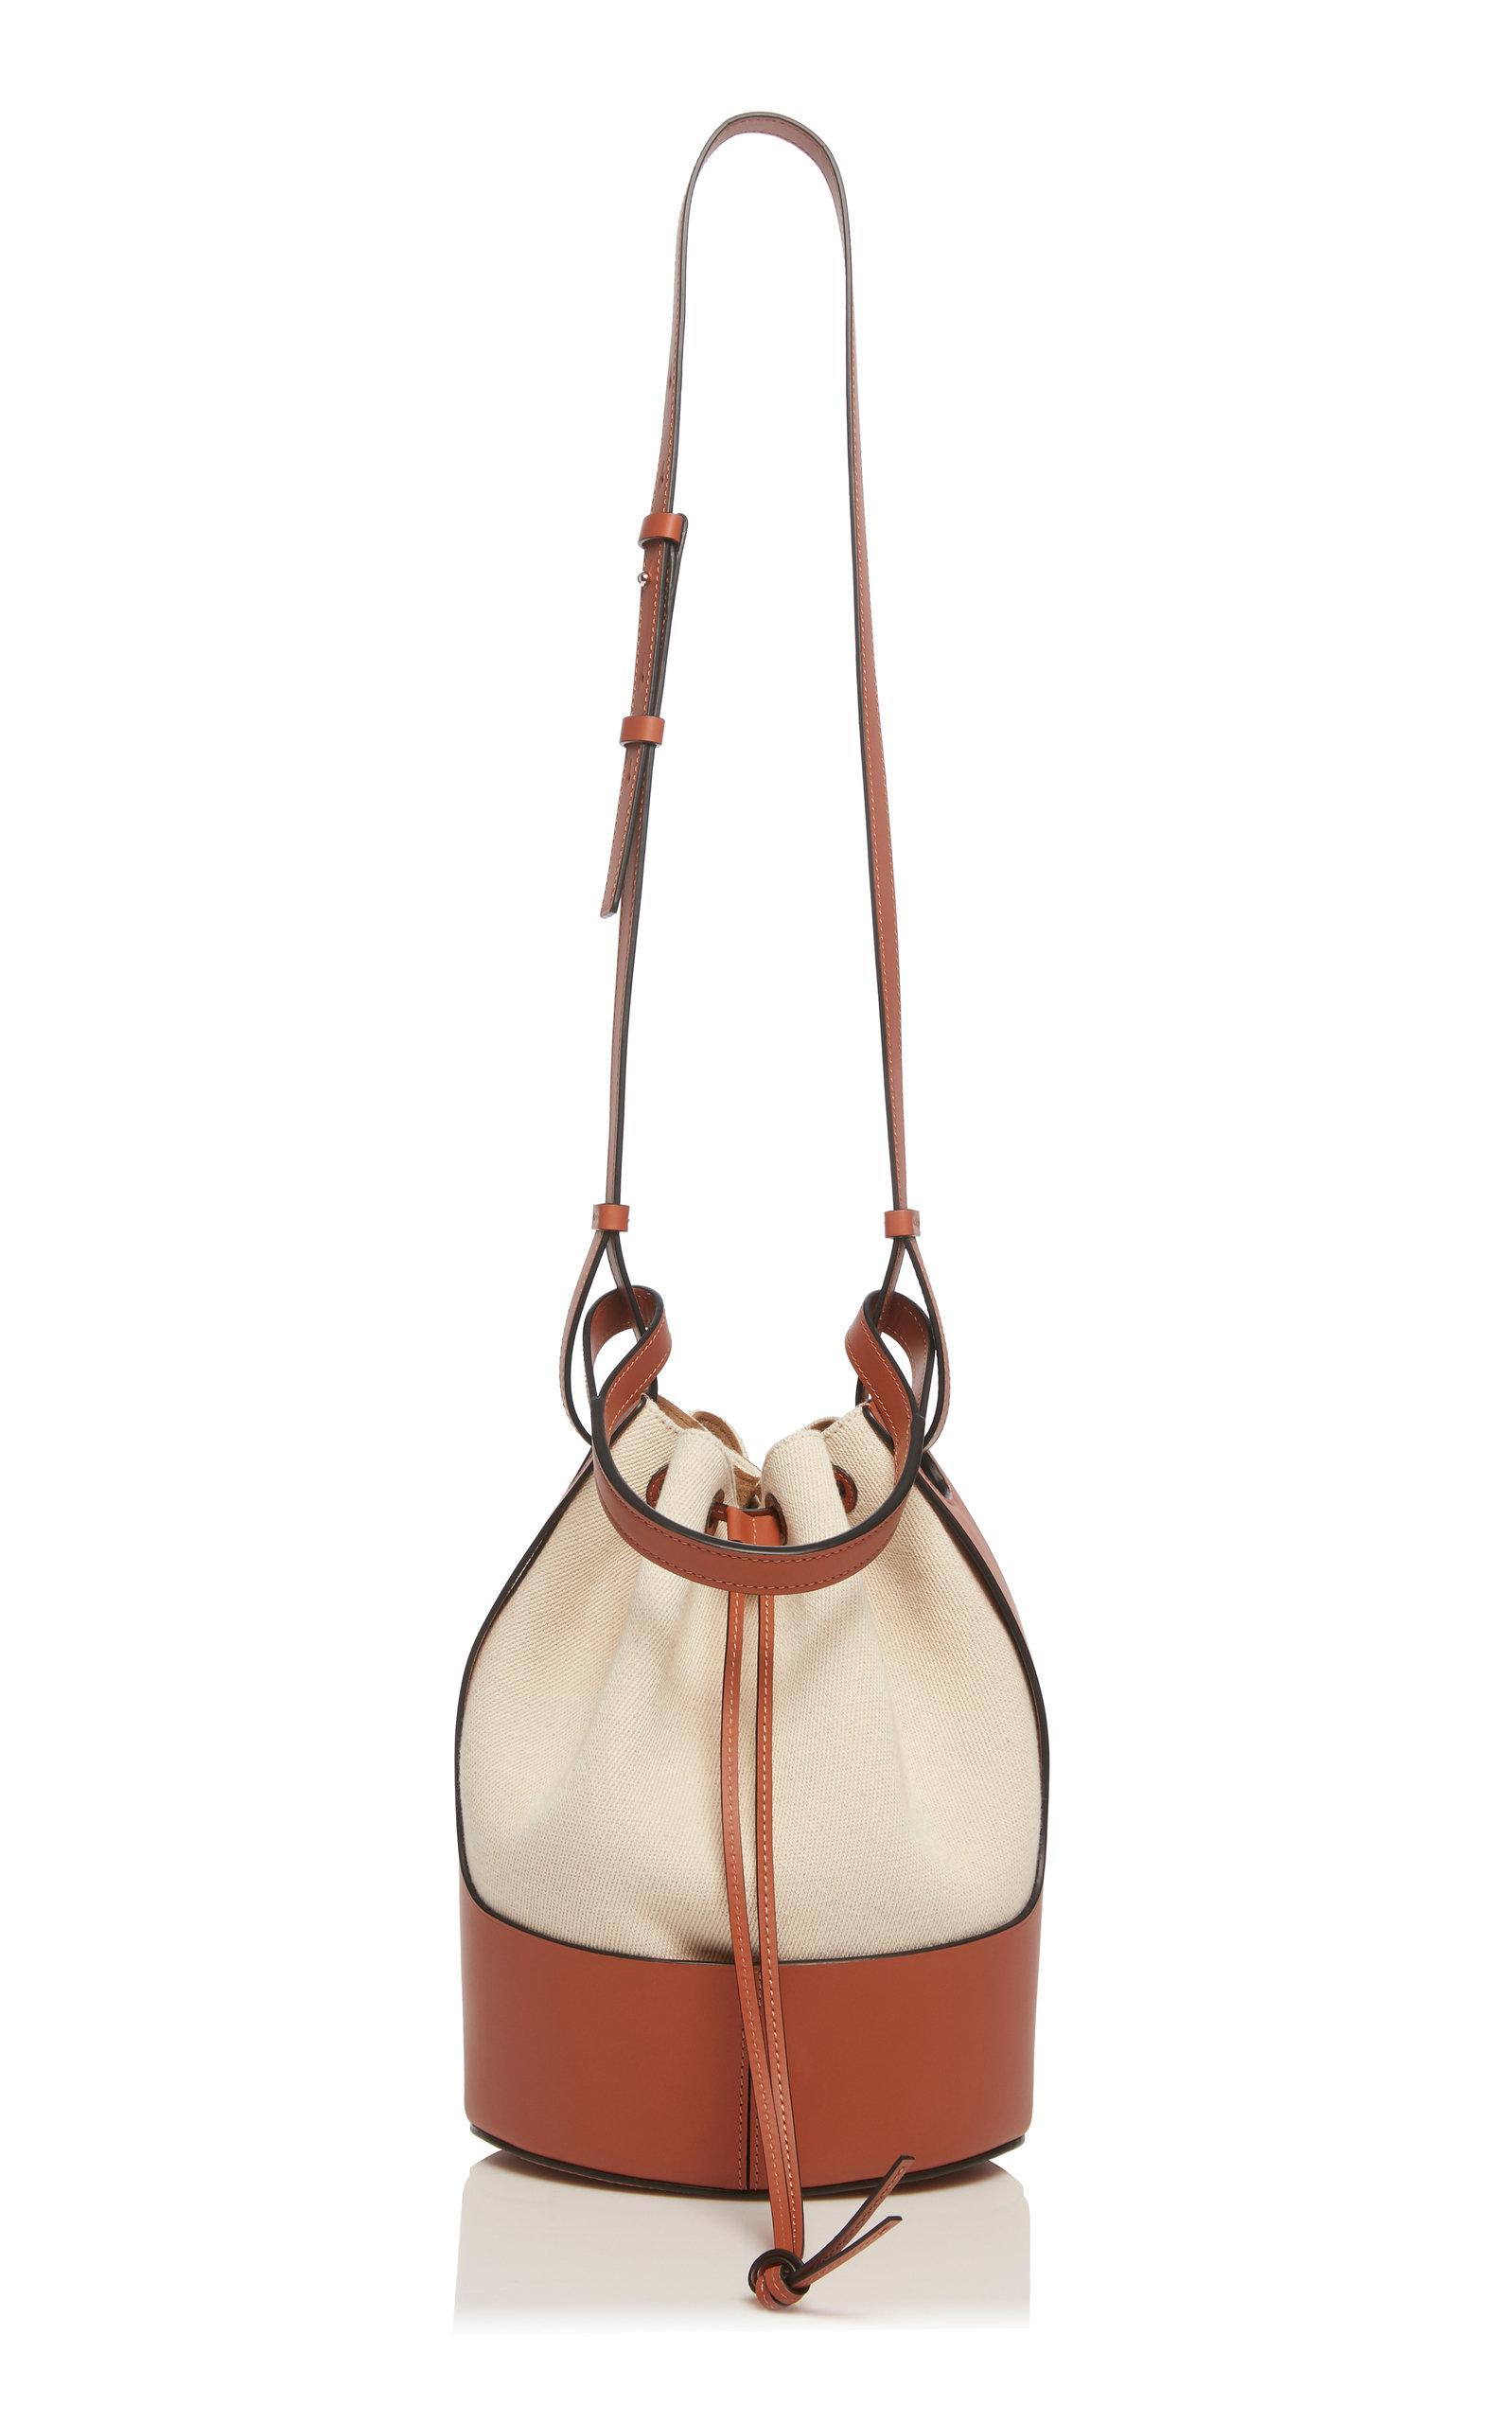 Loewe Small Balloon Leather-trimmed Canvas Bucket Bag - White Tan